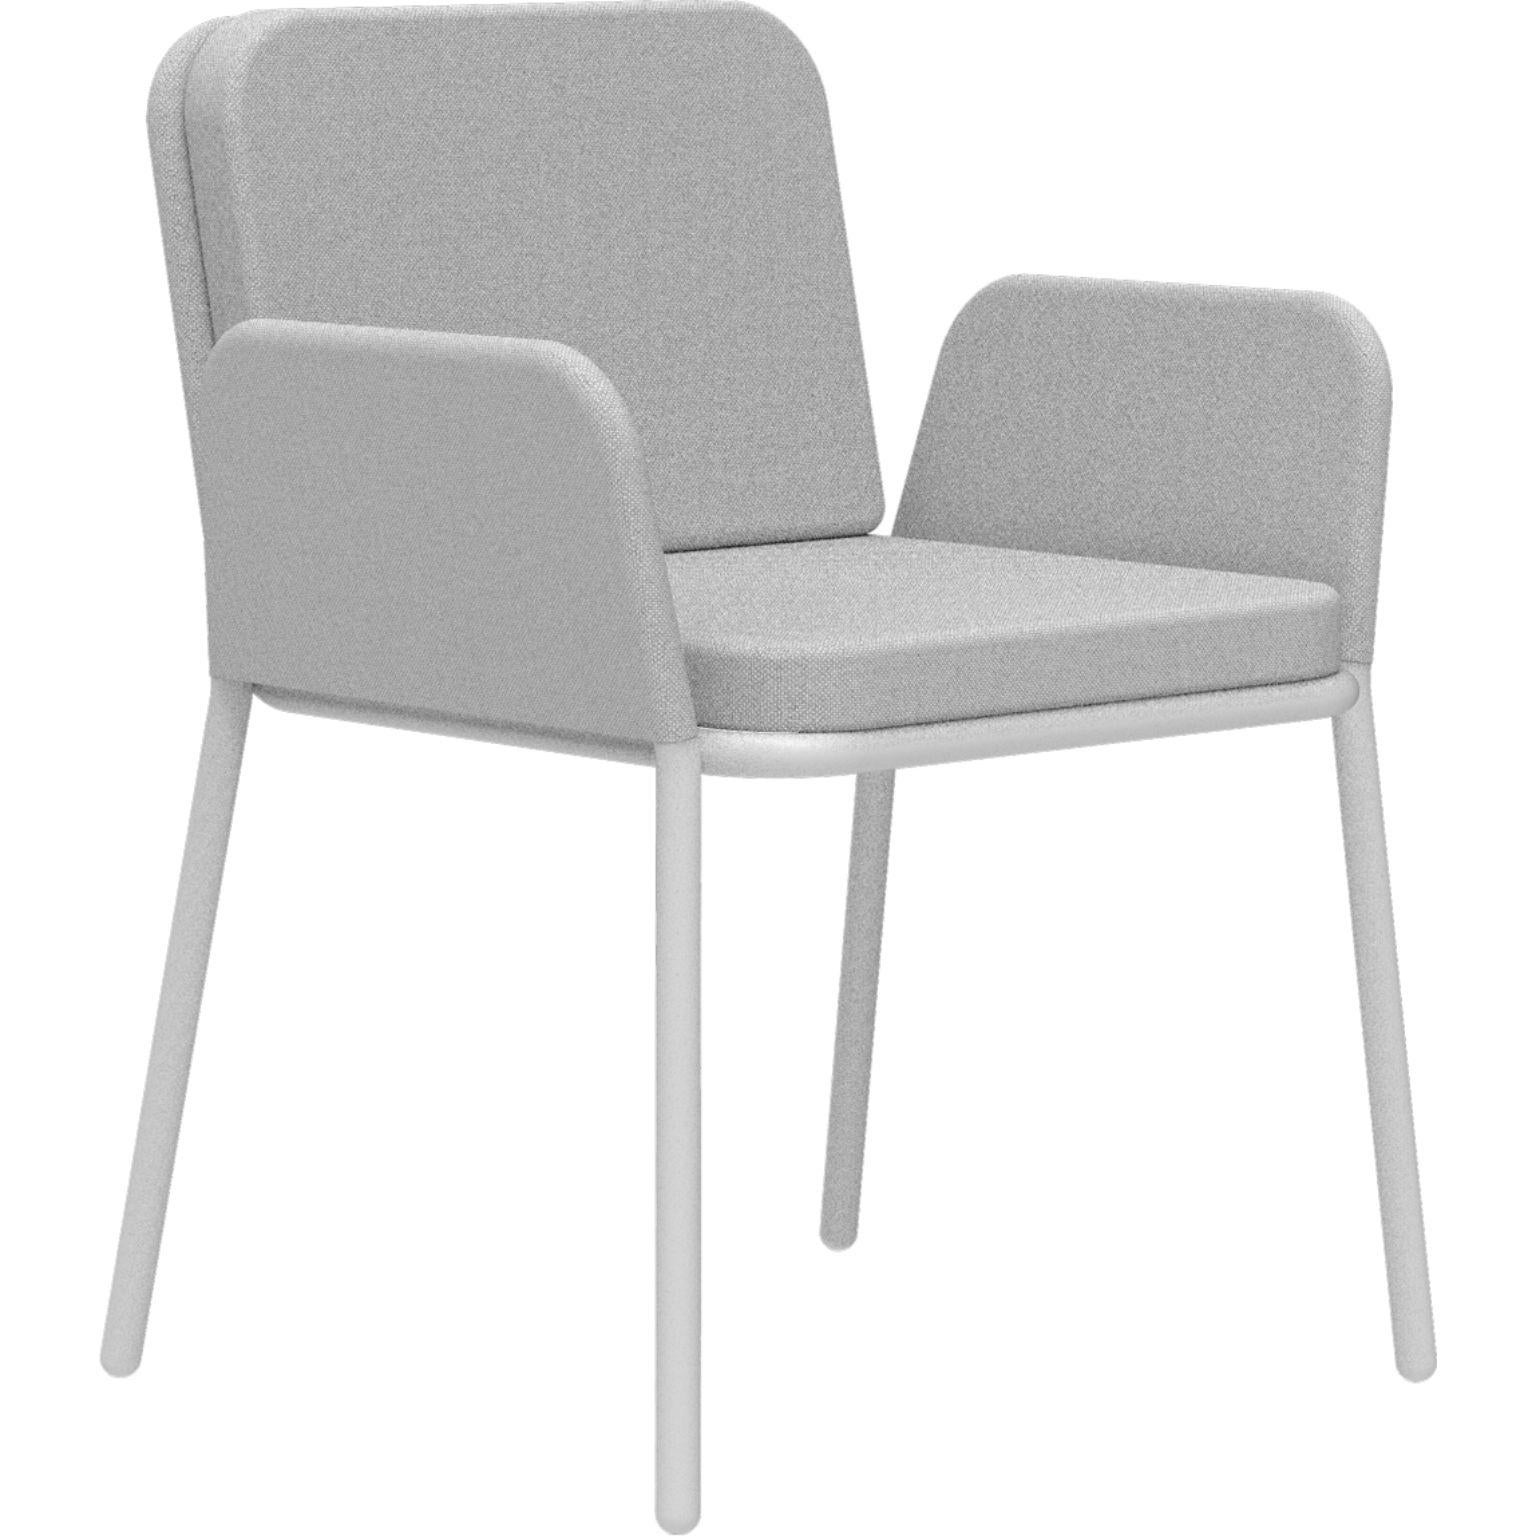 Cover White Armchair by Mowee
Dimensions: D 60 x W 62 x H 83 cm (seat height 48 cm)
Material: Aluminum and upholstery.
Weight: 5 kg.
Also available in different colors and finishes.

An unmistakable collection for its beauty and robustness. A